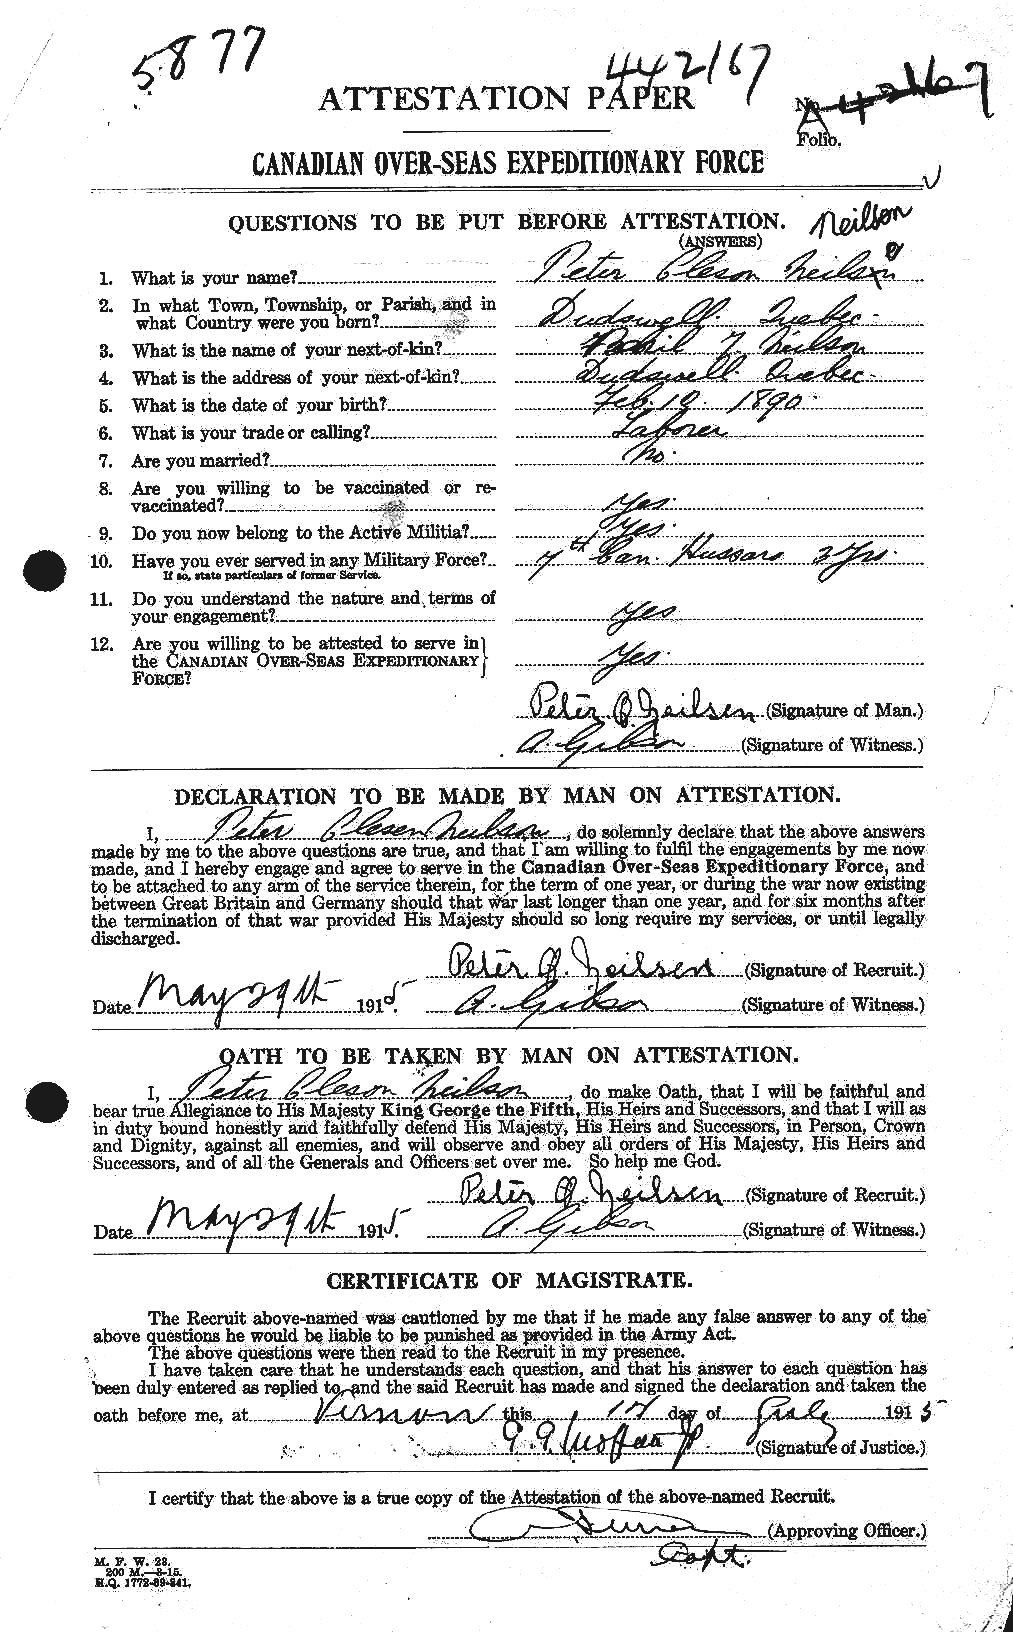 Personnel Records of the First World War - CEF 546673a